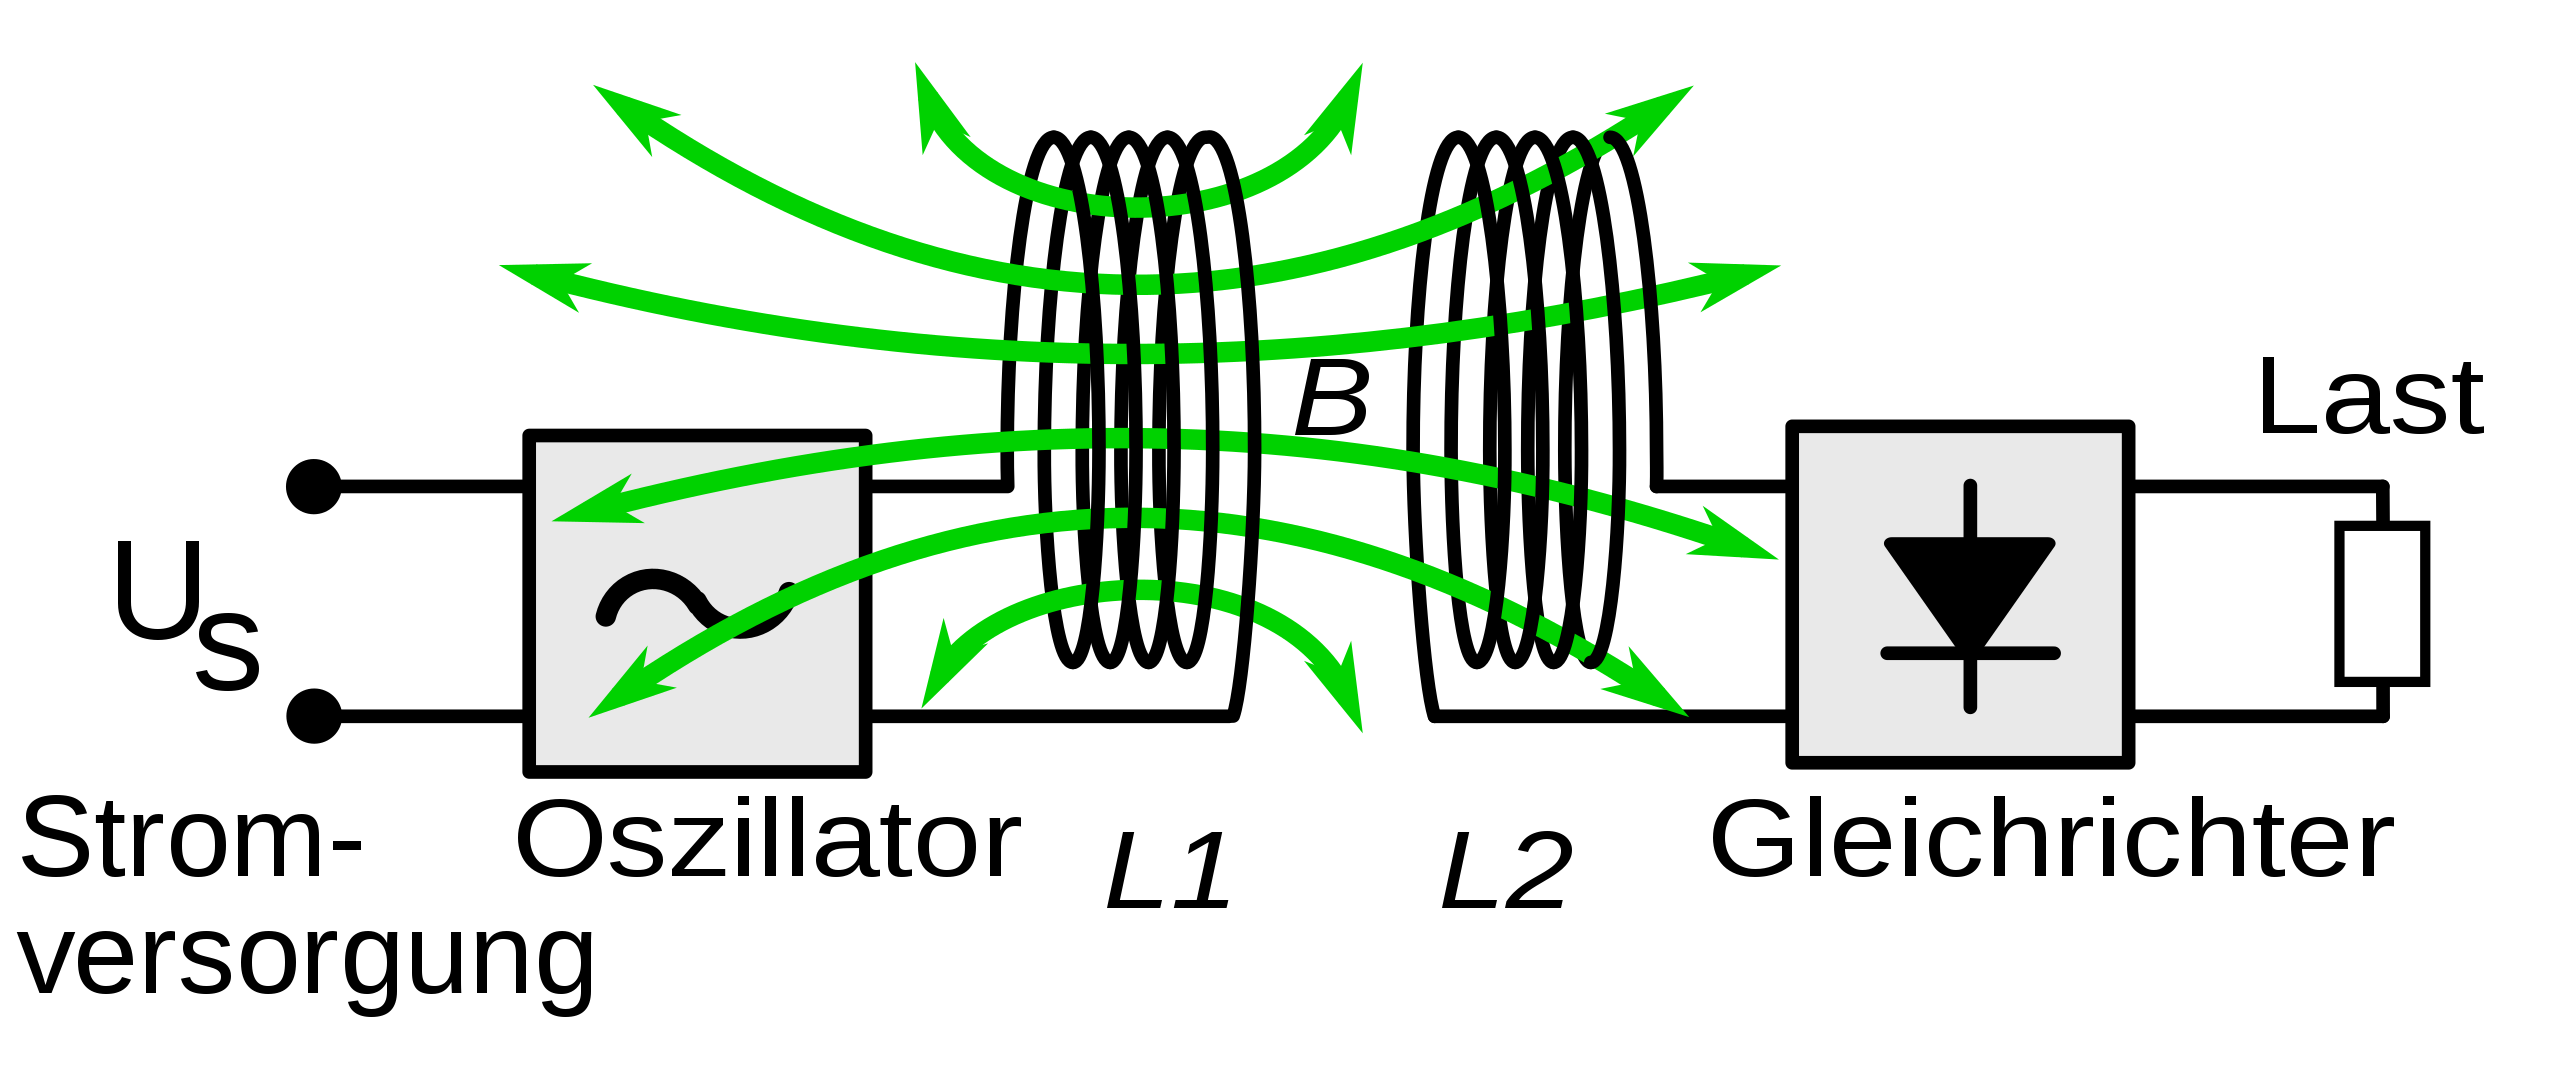 File:Wireless power system - inductive coupling de.svg - Wikimedia Commons